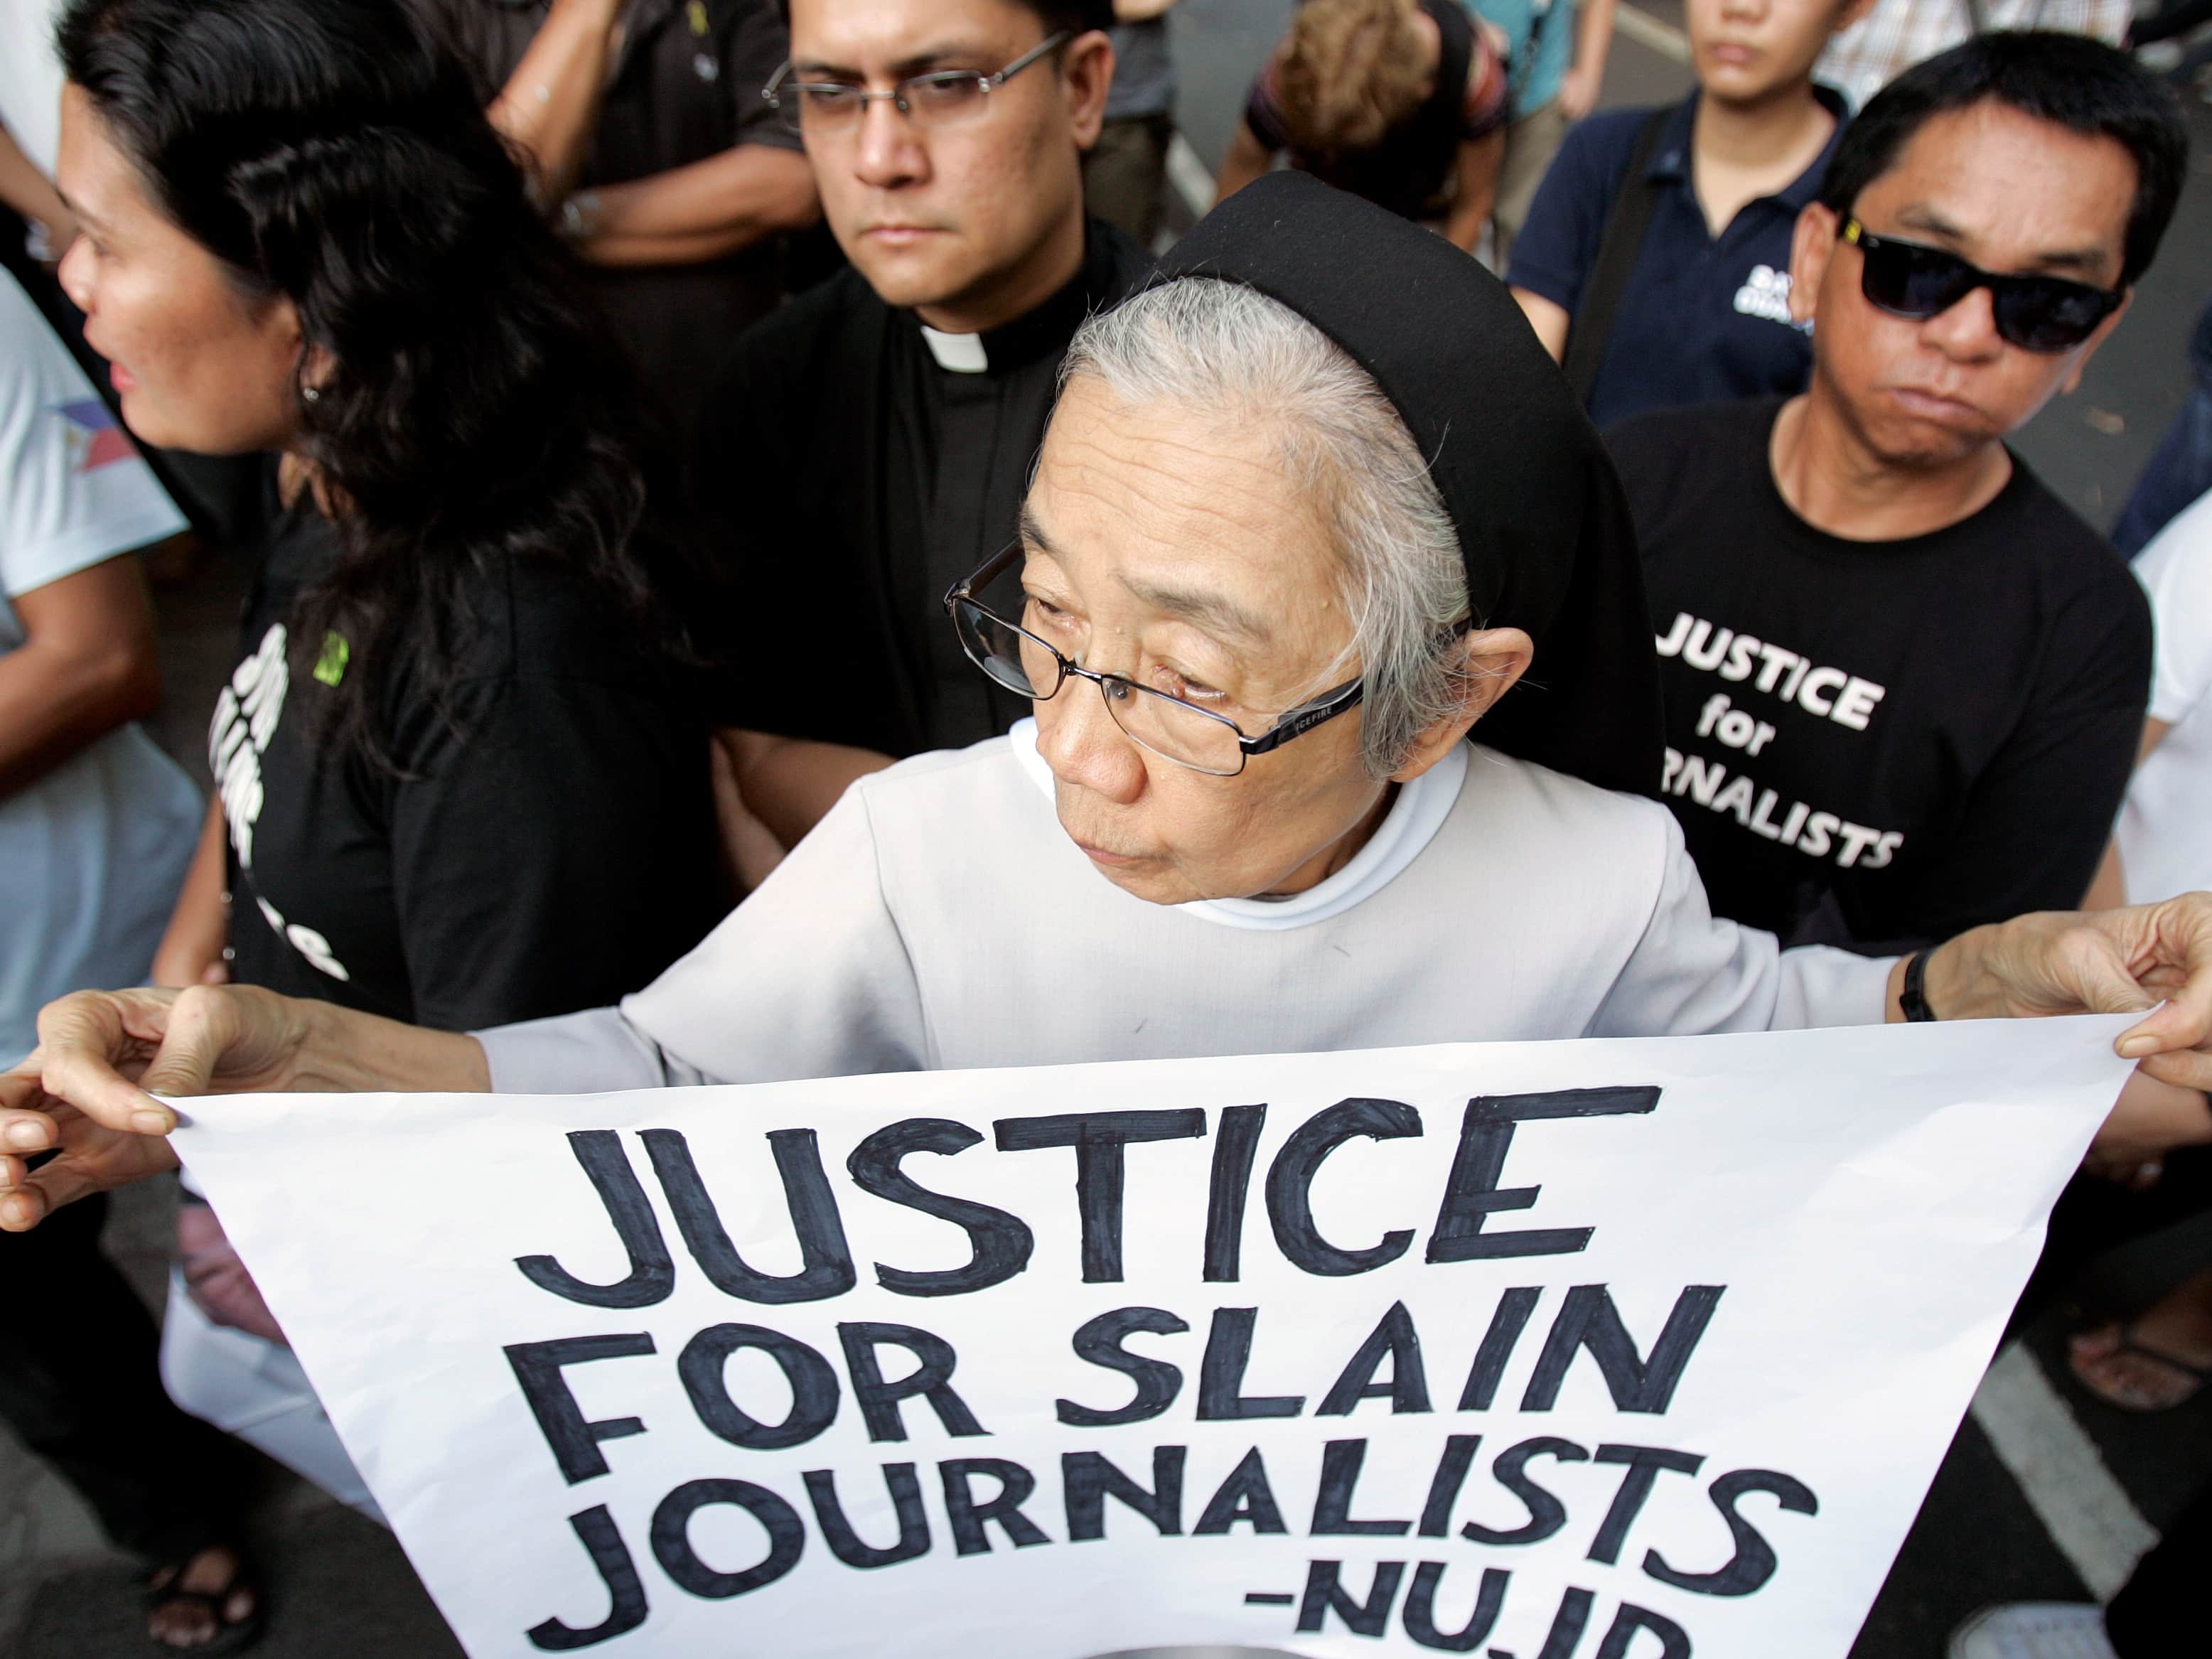 In April 2010, a Roman Catholic nun takes part in a protest in Manila by relatives of journalists killed in the Ampatuan massacre, REUTERS/Romeo Ranoco